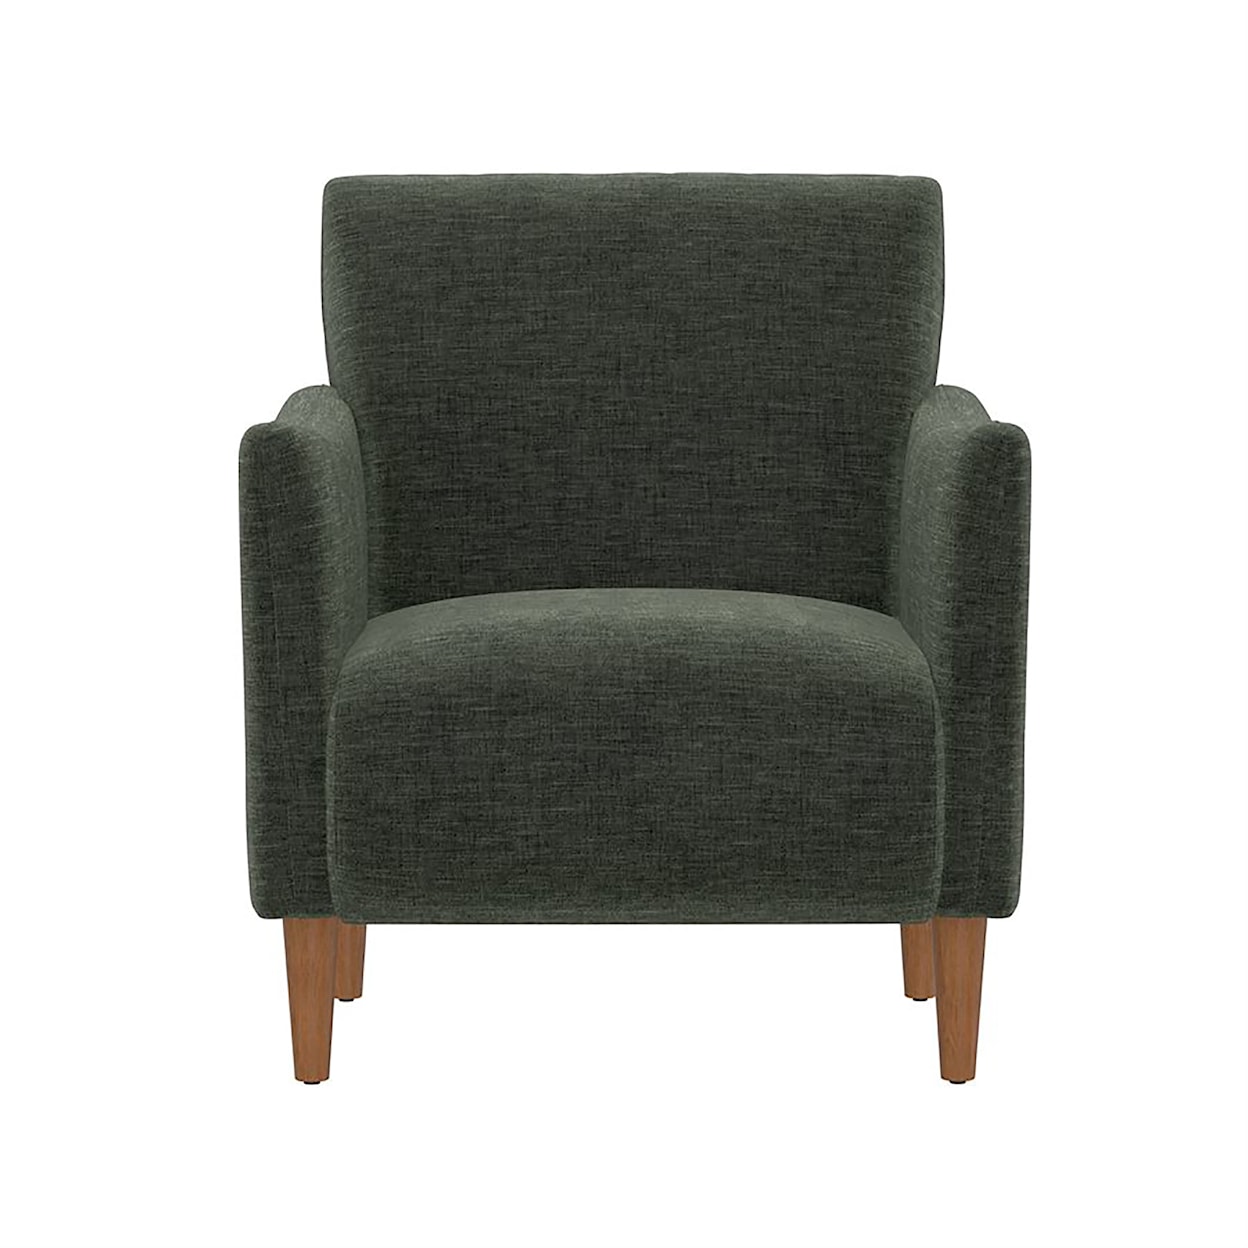 Emerald Accent Chairs Accent Chair